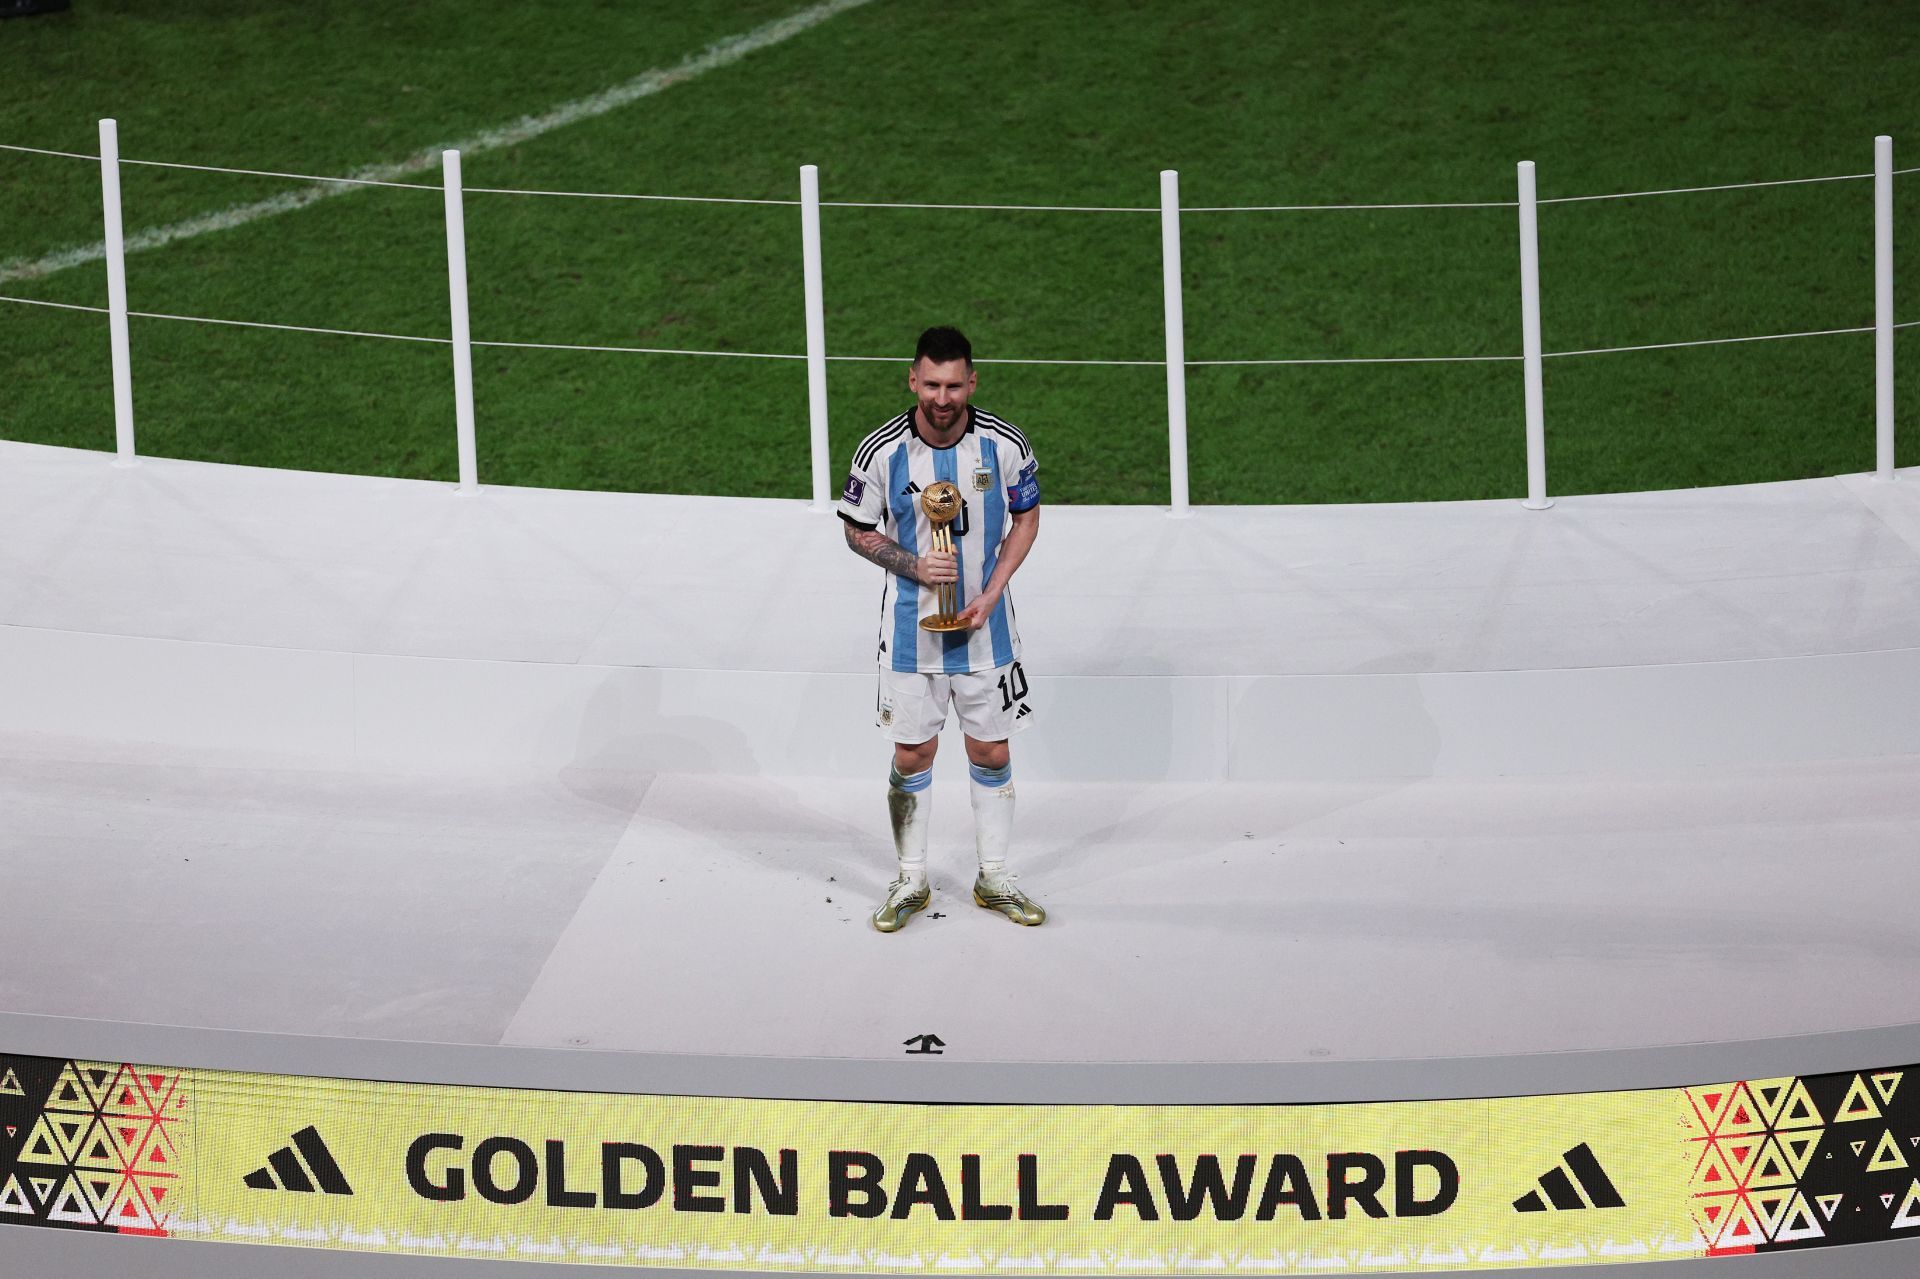 Lionel Messi received the Golden Ball.